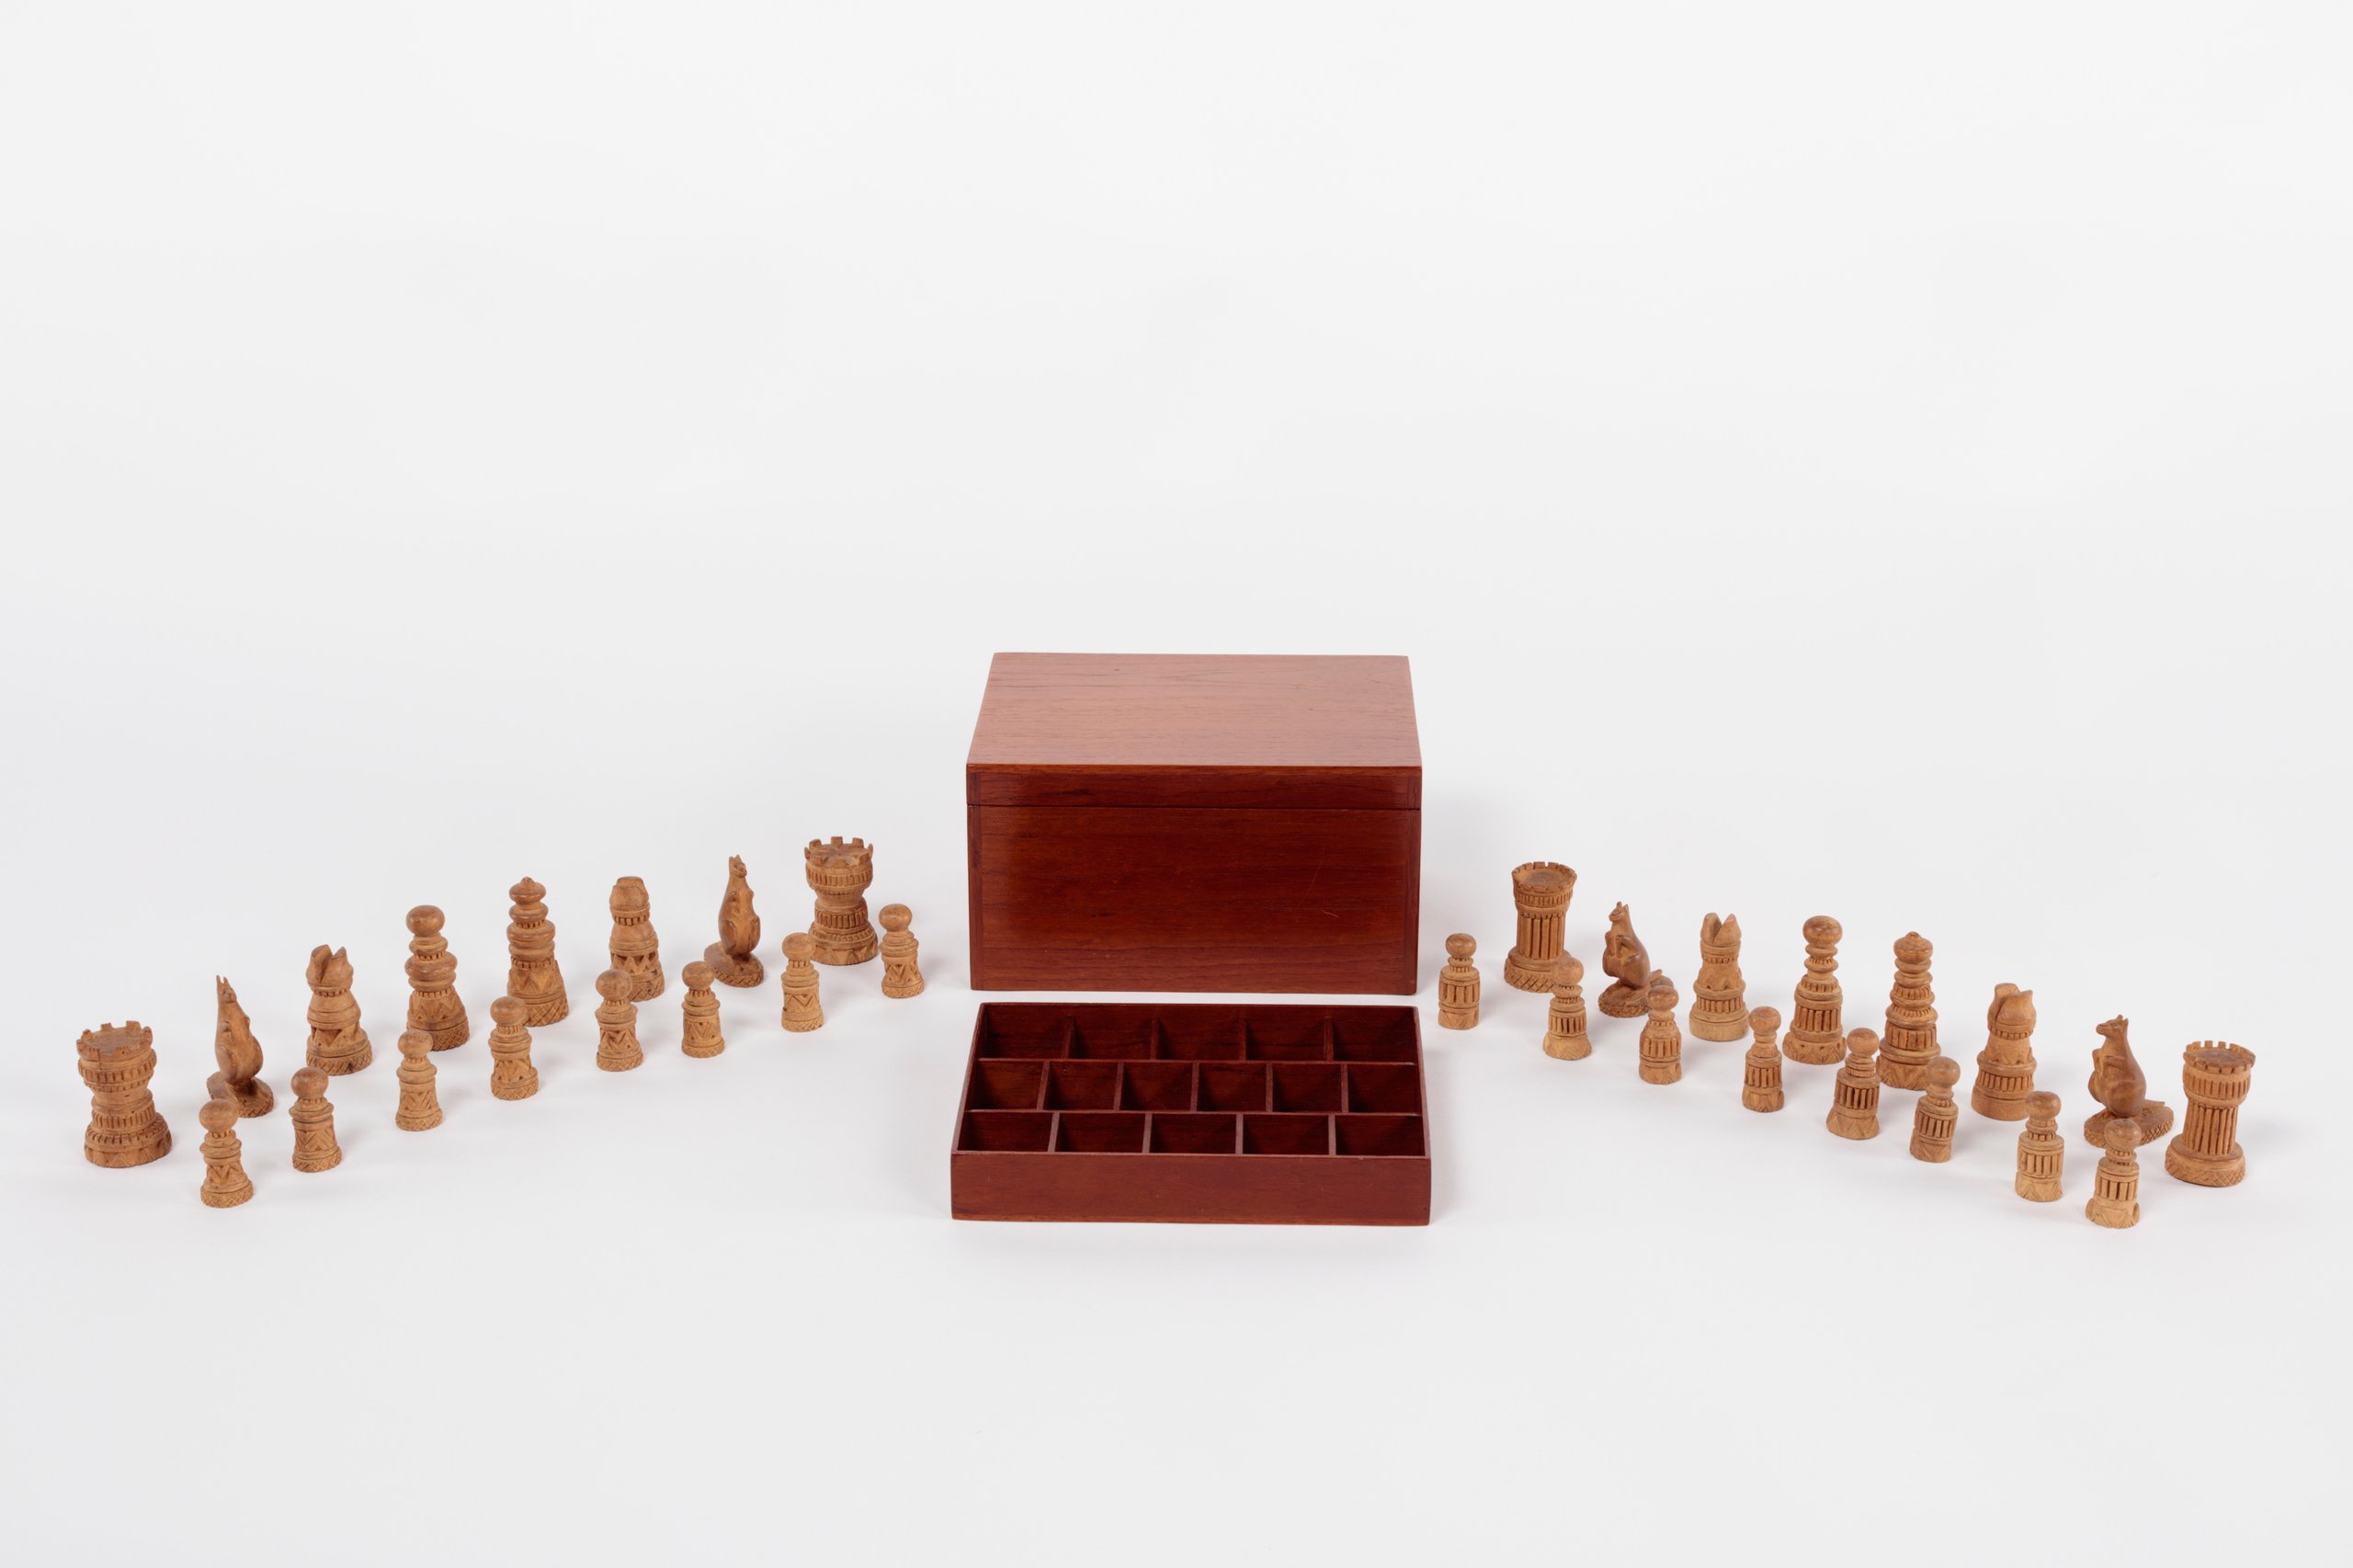 Sandalwood chess set made for Lord Thomas Brassey